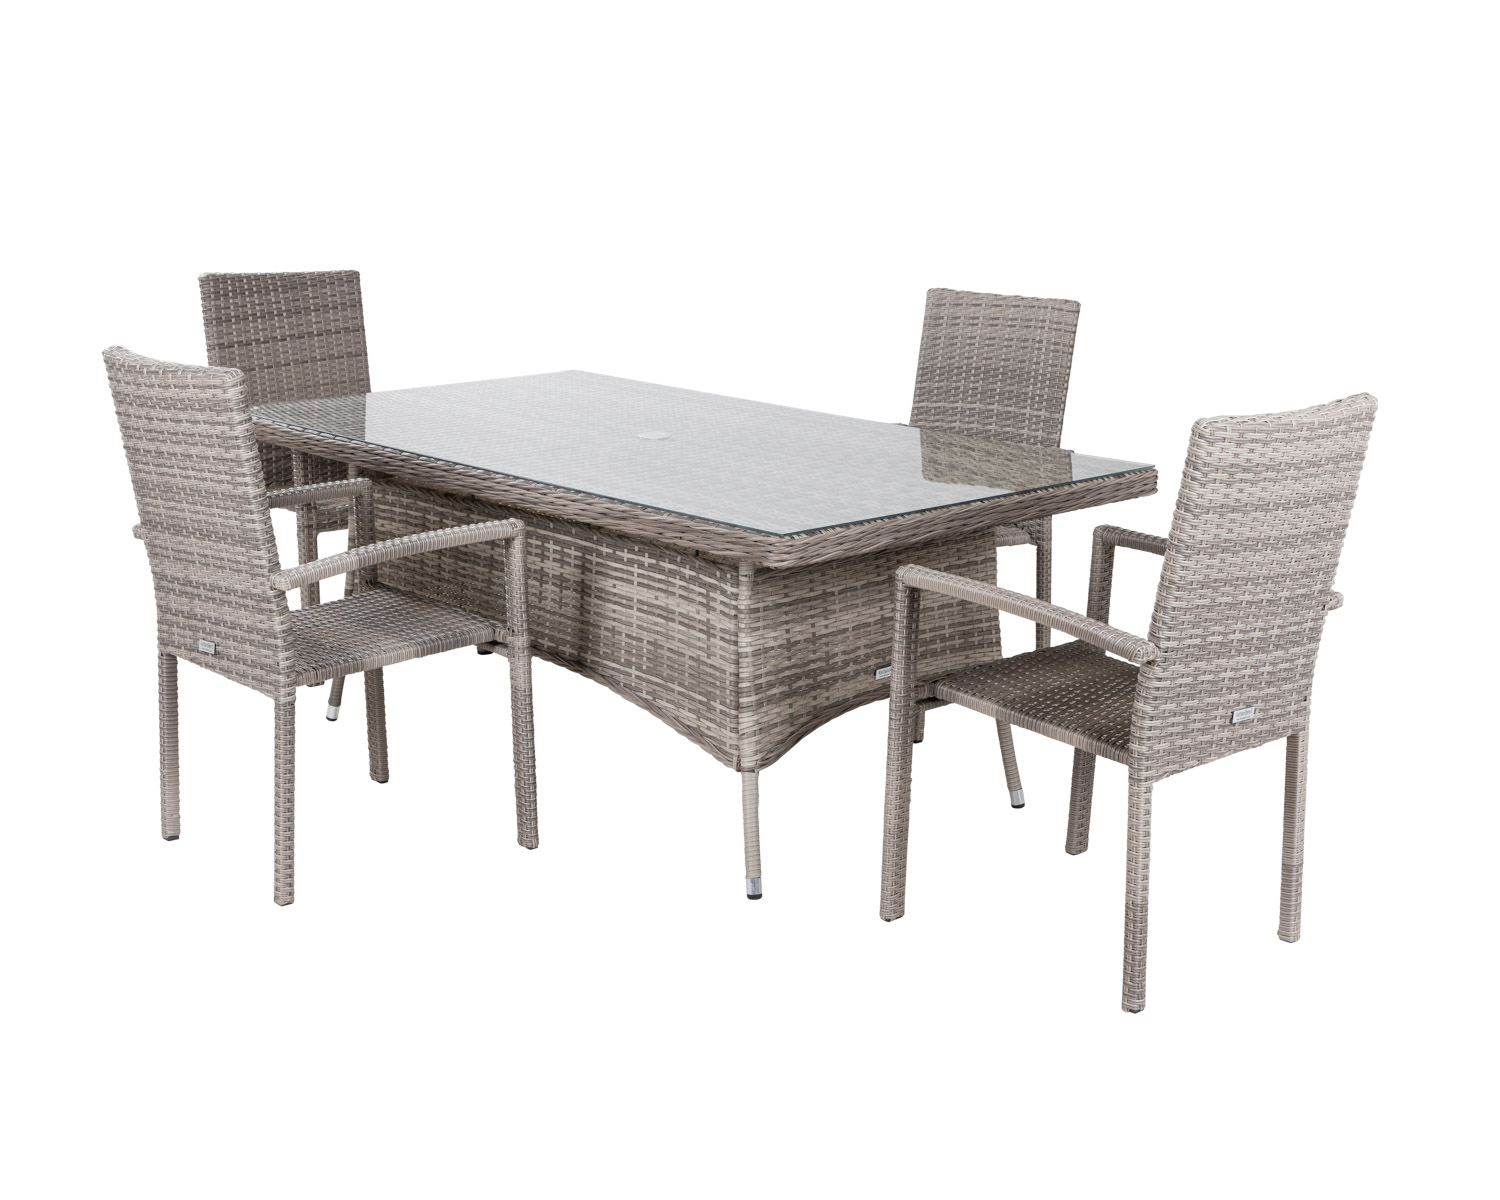 4 Seat Rattan Garden Dining Set With Rectangular Dining Table In Grey Rio Rattan Direct